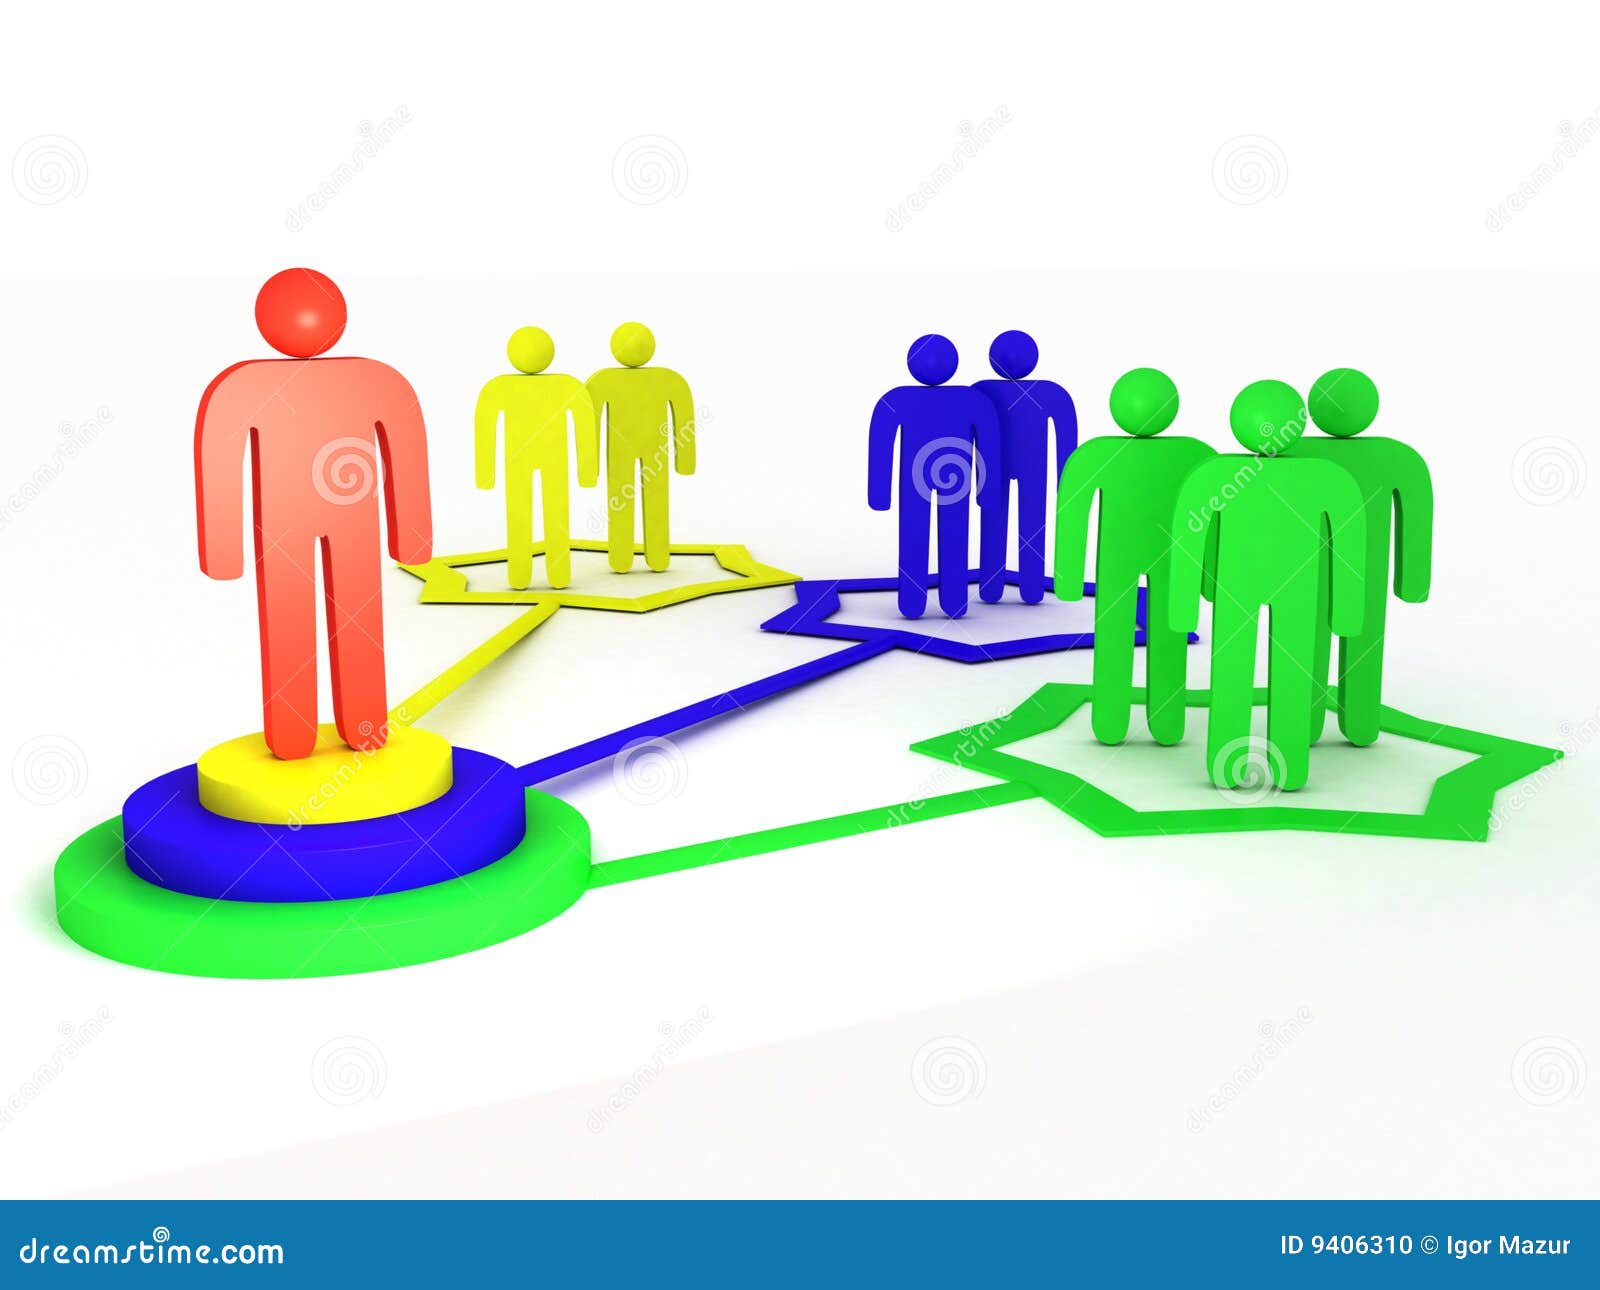 business networking clipart - photo #25